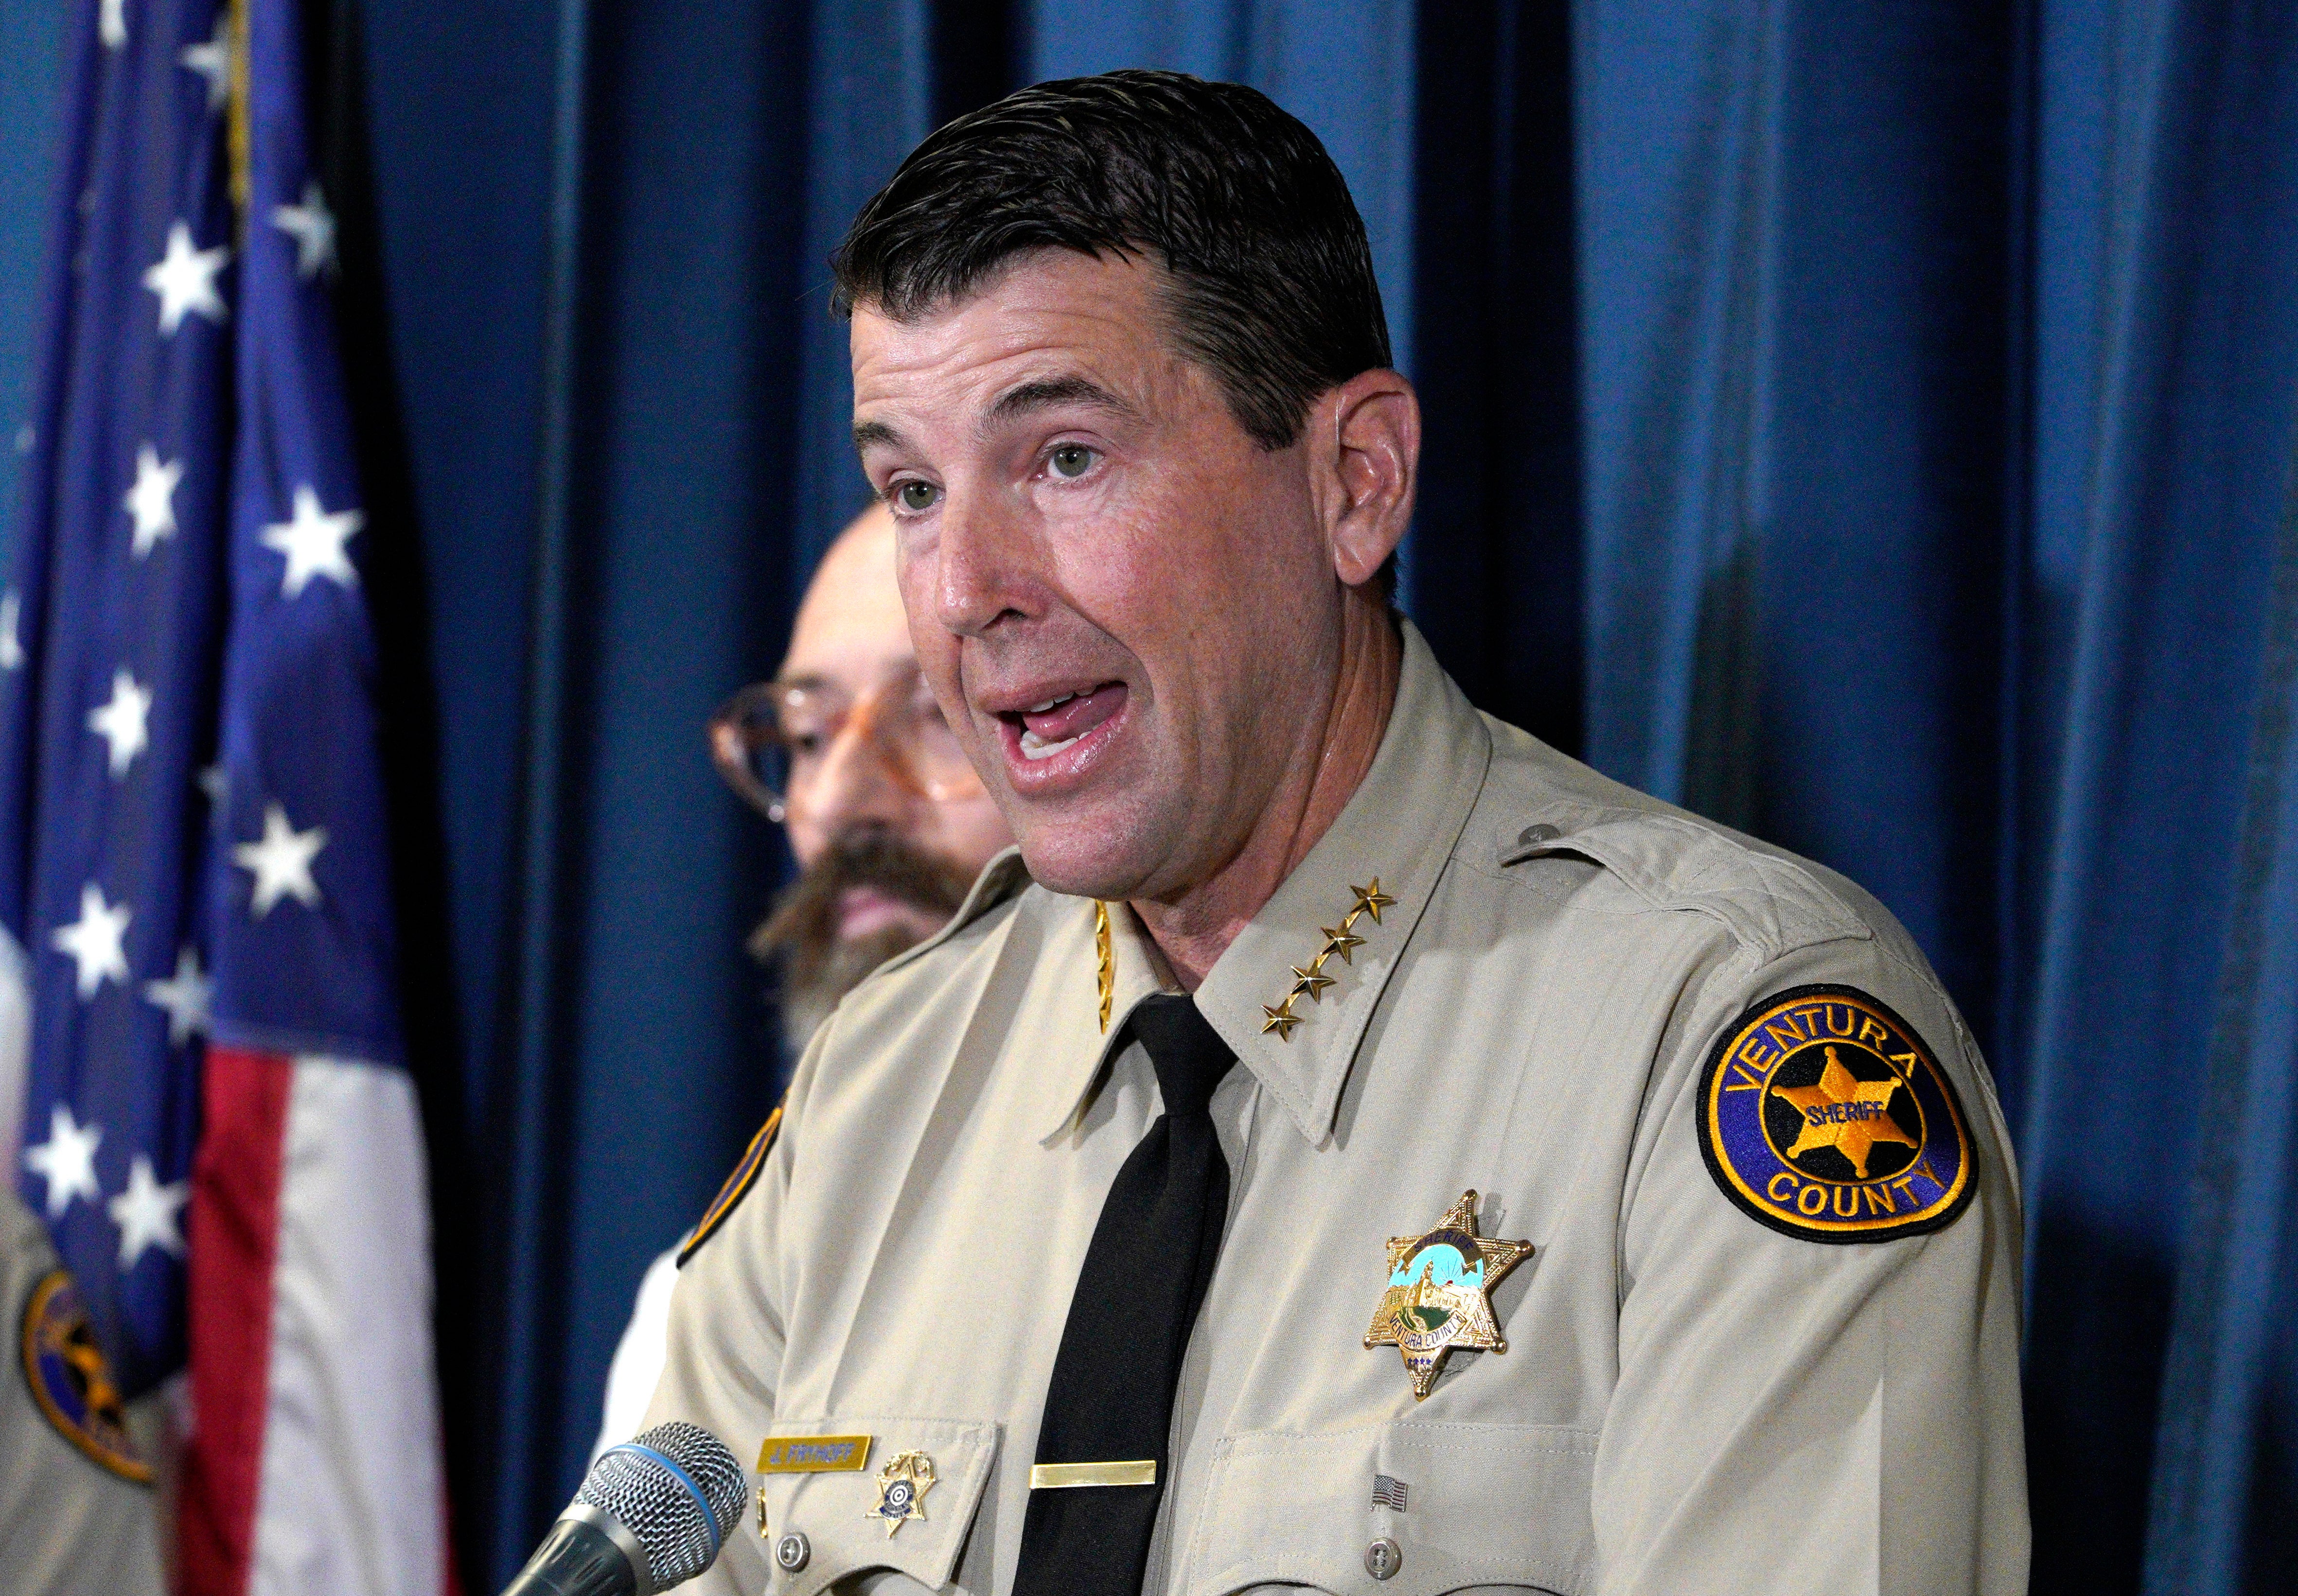 Ventura County Sheriff Jim Fryhoff takes questions during a news conference at the Ventura Sheriff's East County Station in Thousand Oaks, Calif., Tuesday, Nov. 7, 2023.